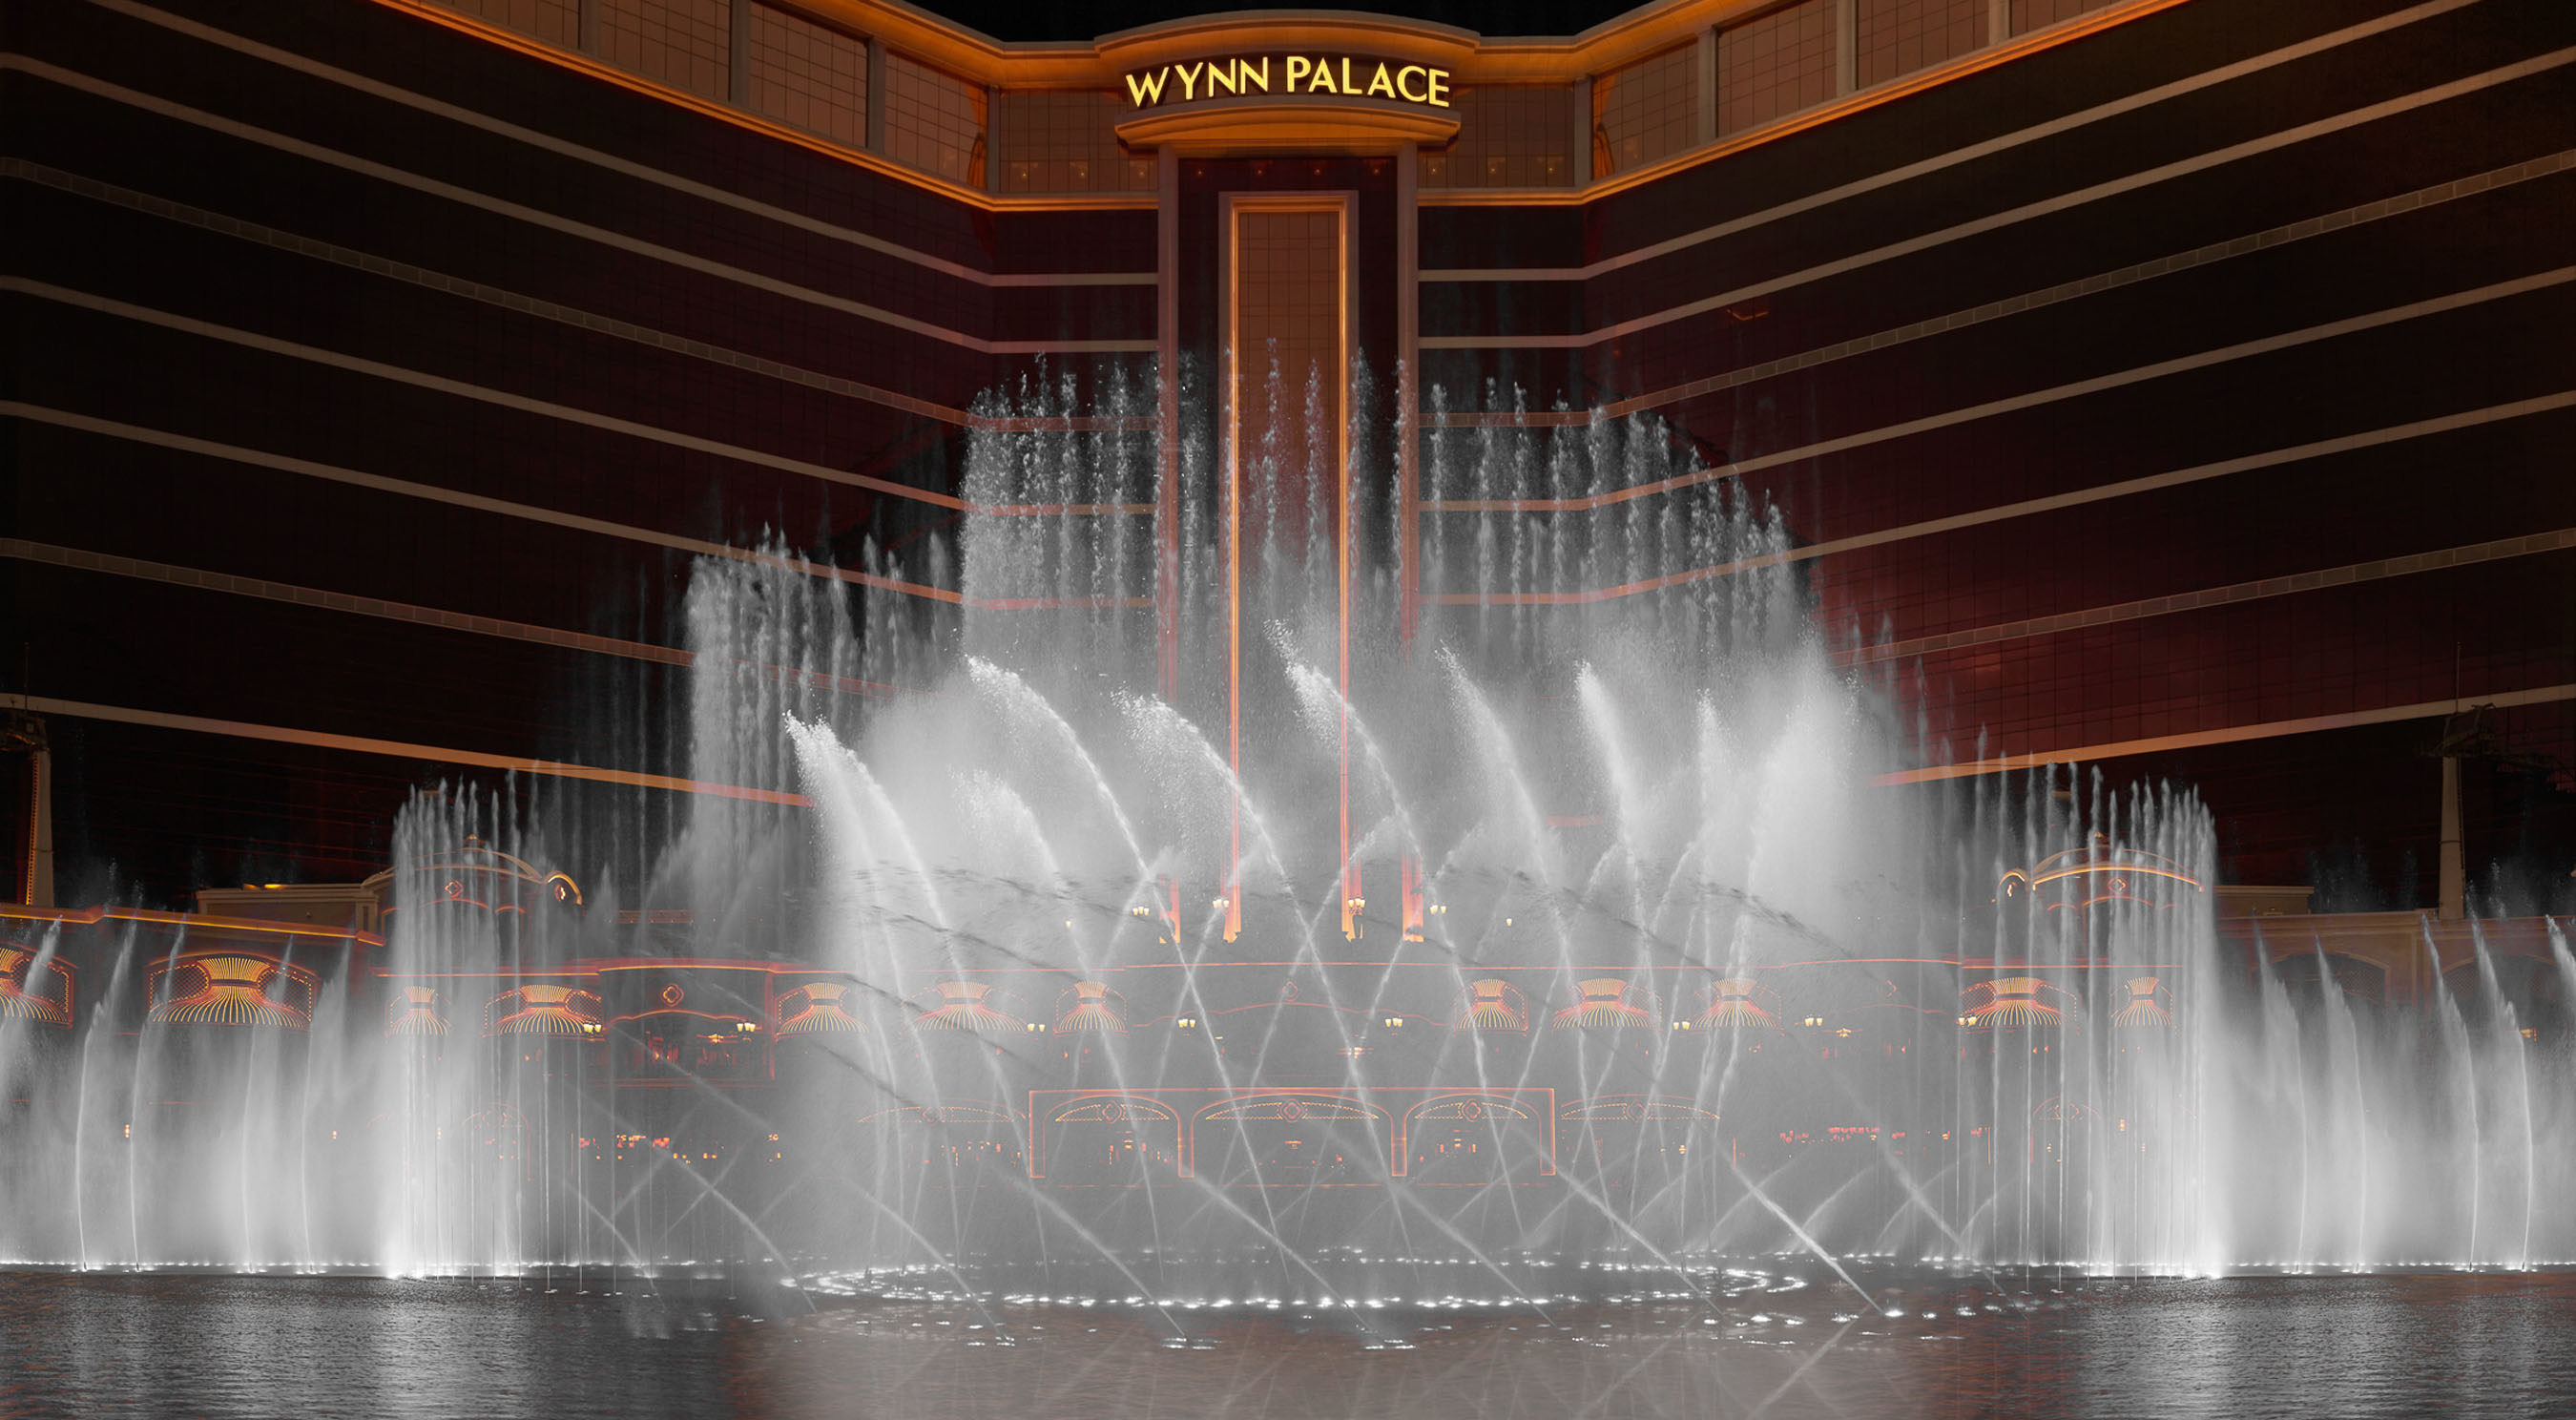 Wynn Palace, located in the heart of Cotai, Macau, officially opened to the world with a spectacular Performance Lake show choreographed to its signature song, 'Elegance'.